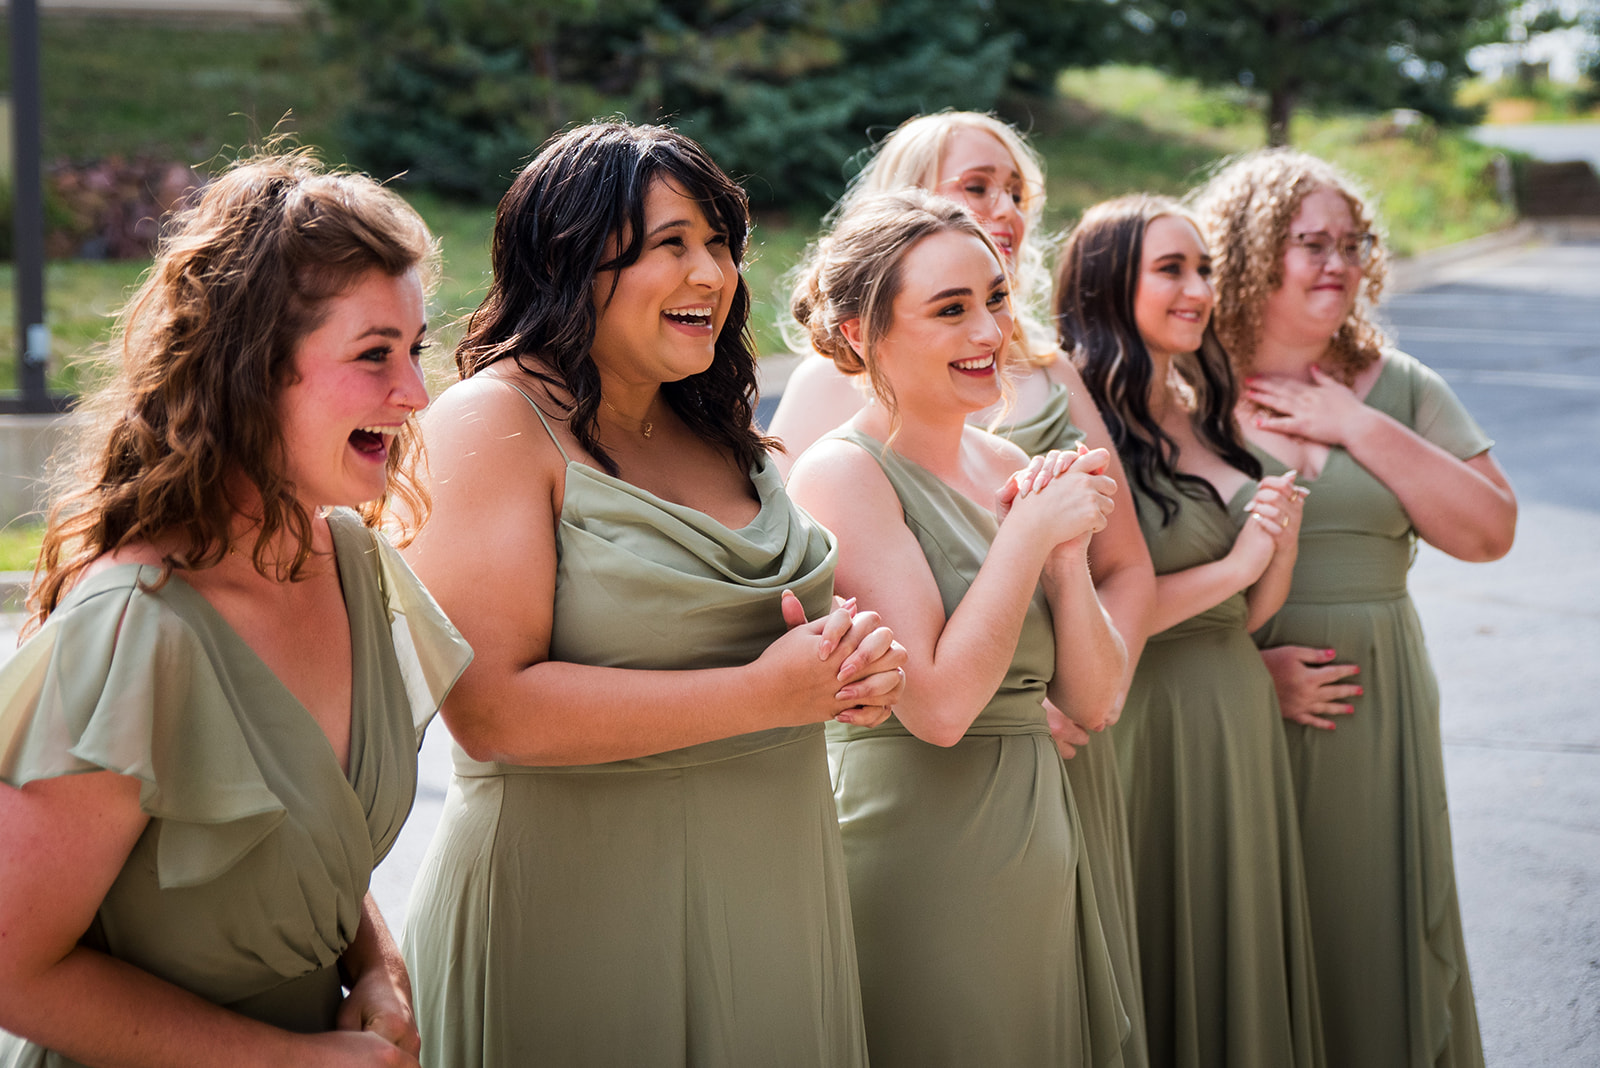 The bridesmaids react emotionally during the bride and bridesmaid first look.